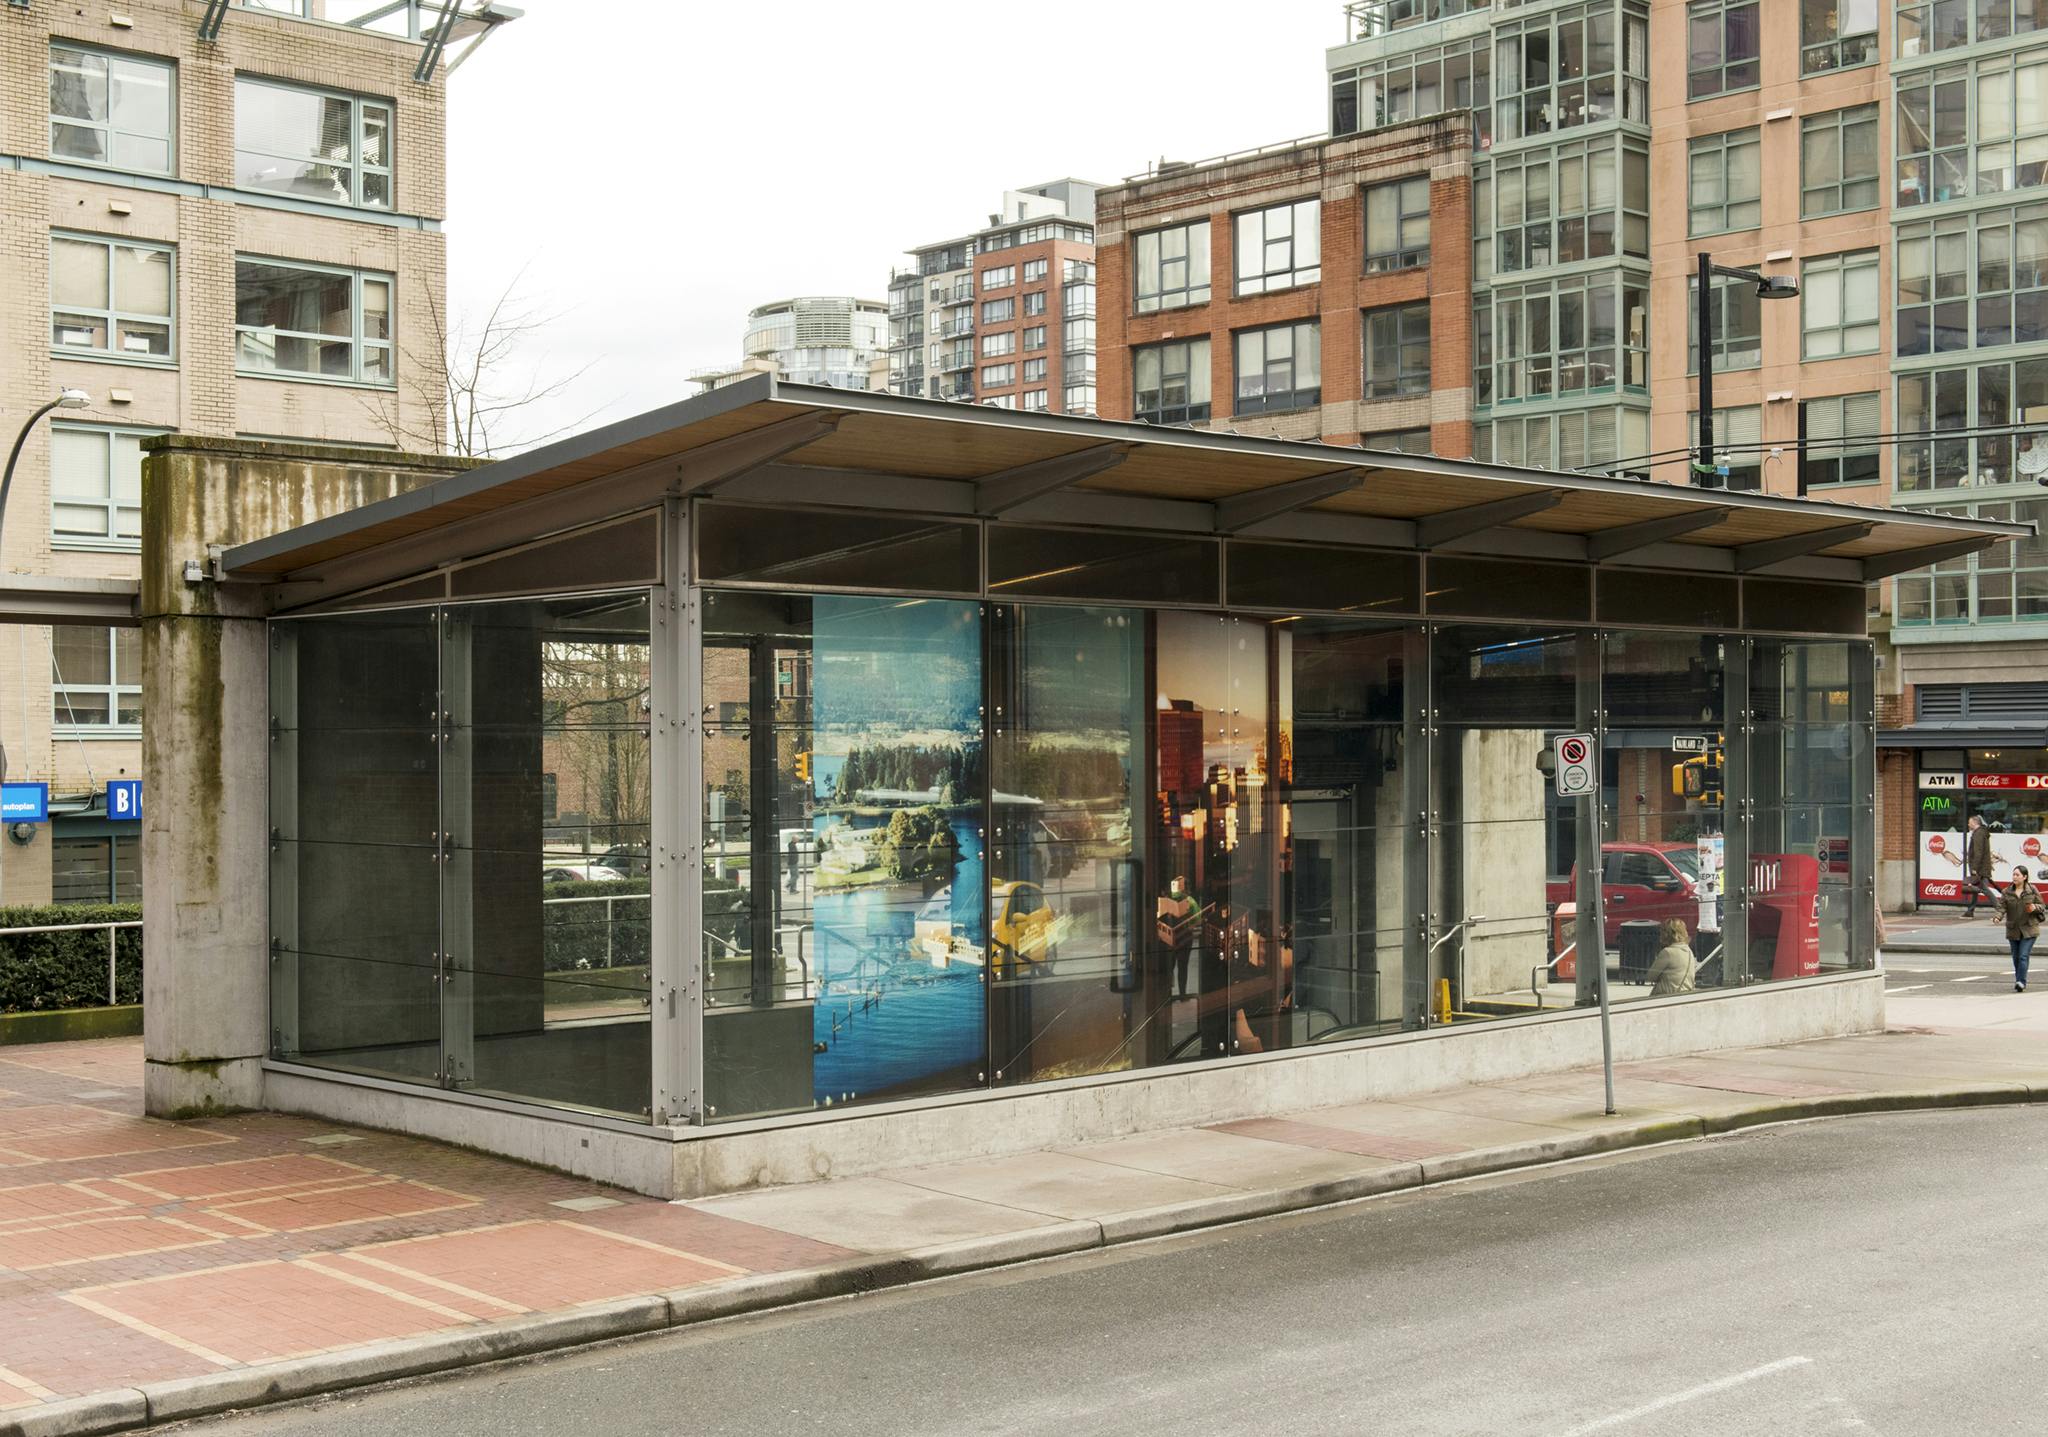 Installed on the glass facade at Yaletown Roundhouse Skytrain station are three, large-scale colour photographs in vinyl depicting aerial views of Vancouver at different times of the day. 